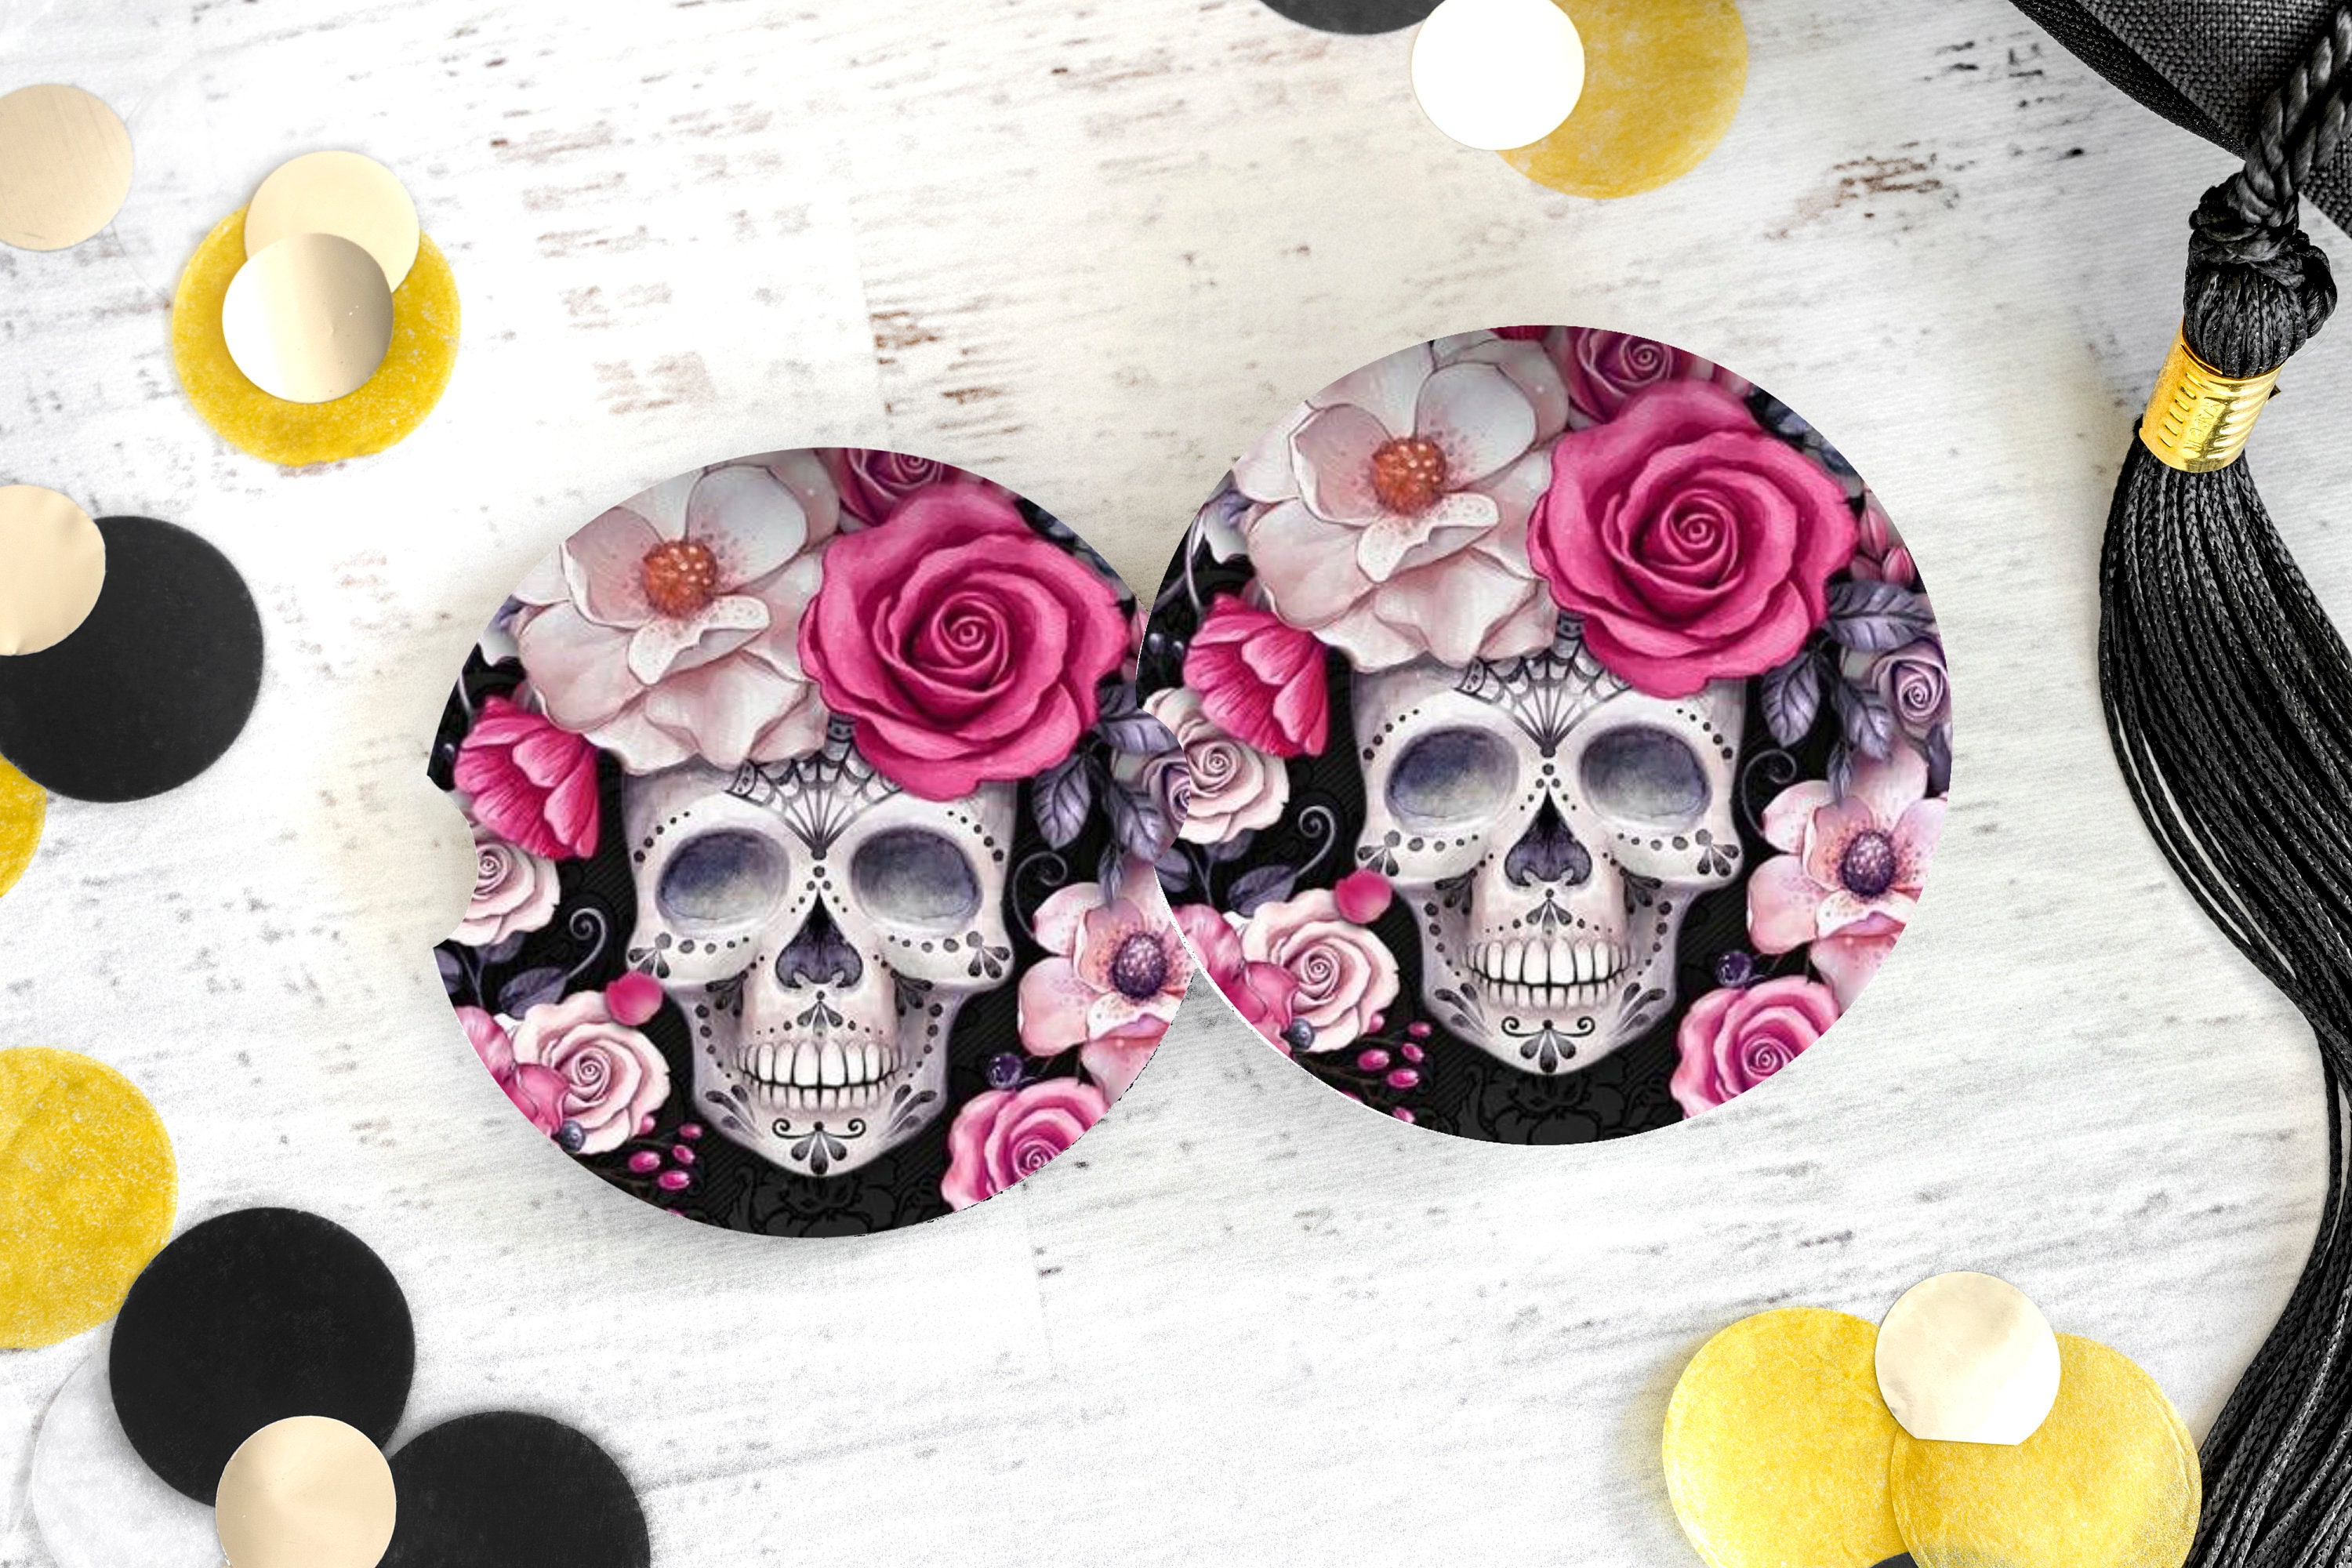 Skull and Pink Roses Air Freshener, Car Accessories for Women, Car Gift,  Pastel Goth, Car Freshie, Rose Skull Gift, Gothic Gifts for Her 